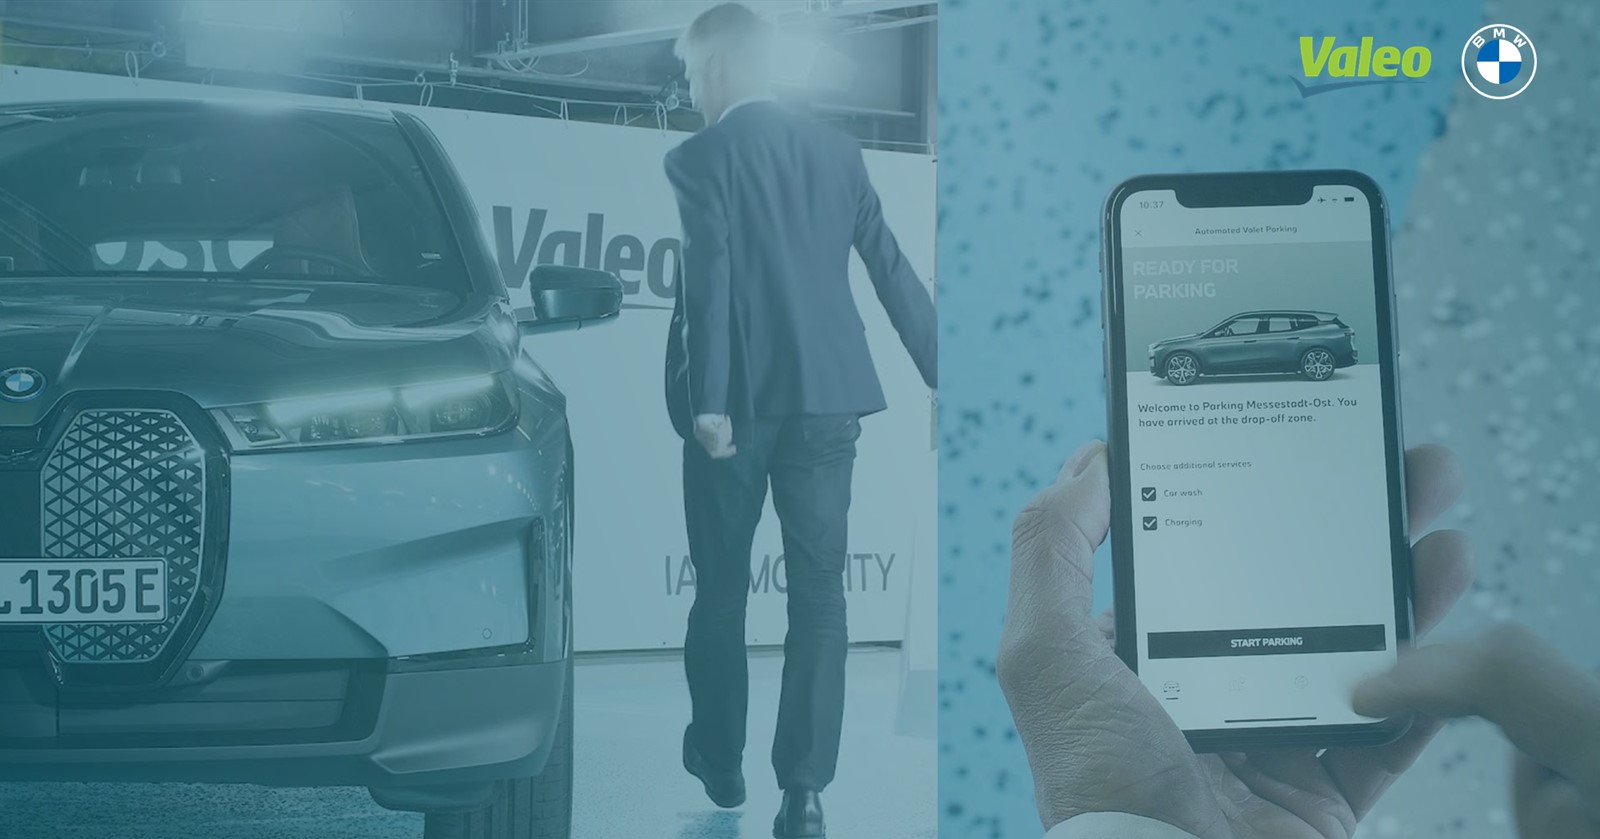 BMW partners with Valeo to develop new Level 4 Automated Valet Parking